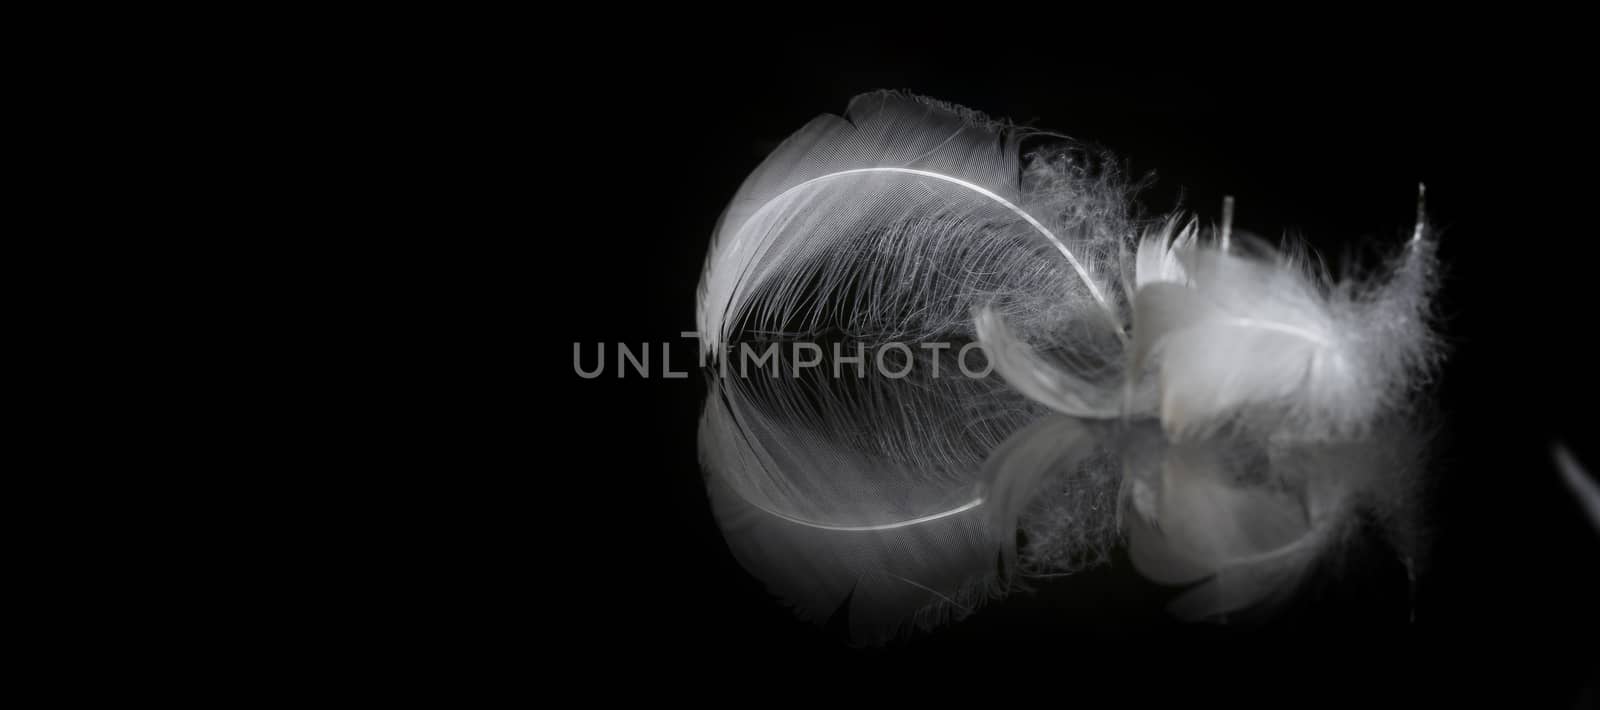 An extreme close-up / macro photograph of a detail of two soft white feather, black background.